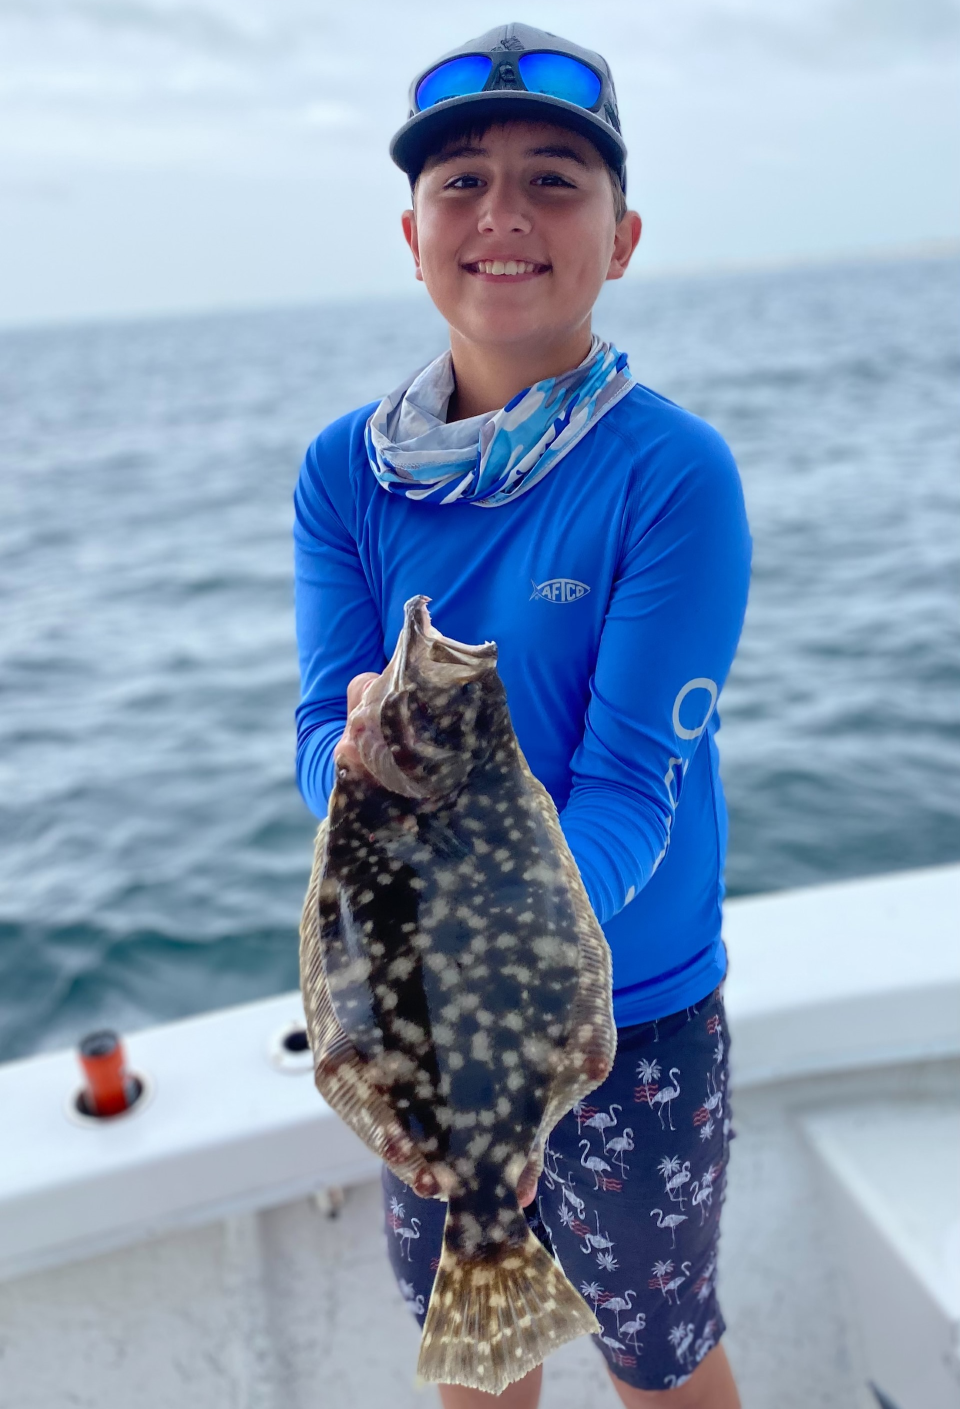 Walker Korey with a nice flounder he caught near Ponce Inlet aboard Capt. Jeff Patterson's Pole Dancer.